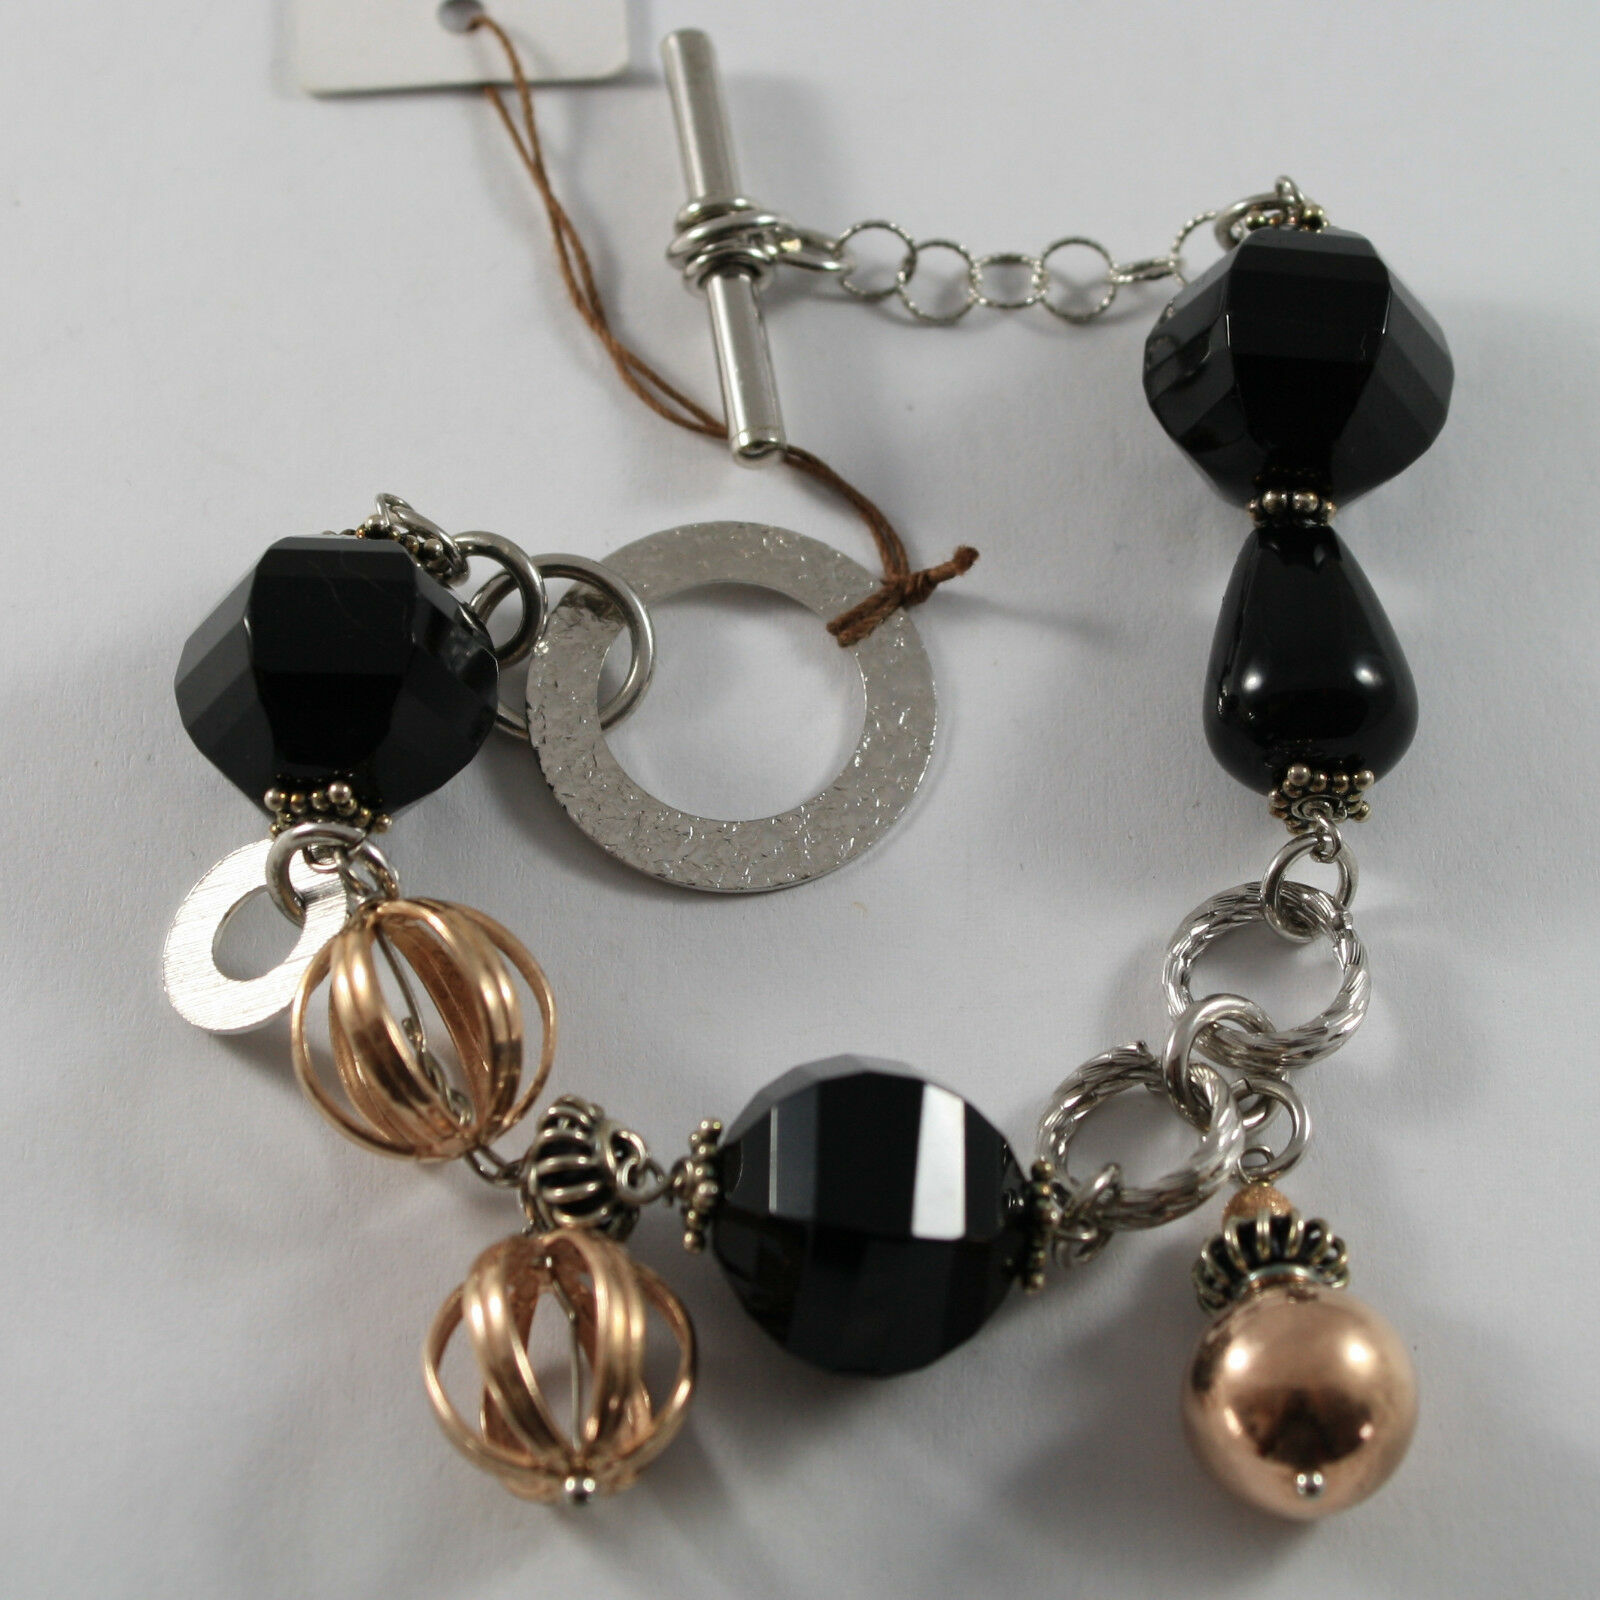 Primary image for .925 RHODIUM SILVER AND ROSE GOLD PLATED BRACELET WITH BLACK ONYX